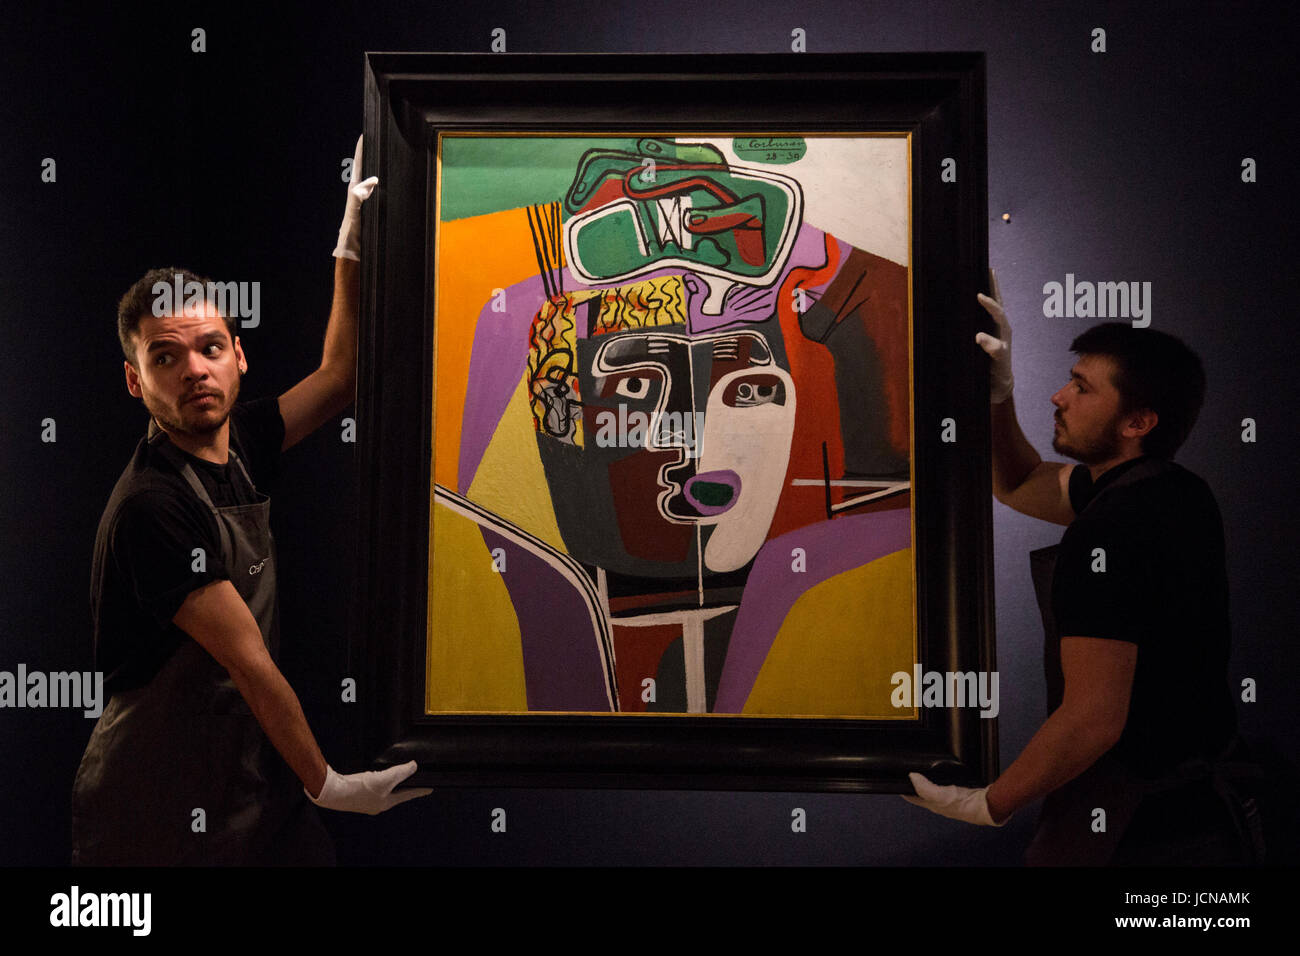 London, UK. 16 June 2017. Christie's technicians handling the painting Mains croisees sur la tete, 1939-40, by Le Corbusier, est GBP 1.2-2m which is influenced by Pablo Picasso. Auction house Christie's presents a preview of the Impressionist and Modern Art evening sale on 27 June 2017. The sale is part of 20th Century at Christie's and is led by a group of masterpiece paintings by Max Beckmann, Claude Monet, Pablo Picasso, Egon Schiele and Vincent van Gogh. Stock Photo